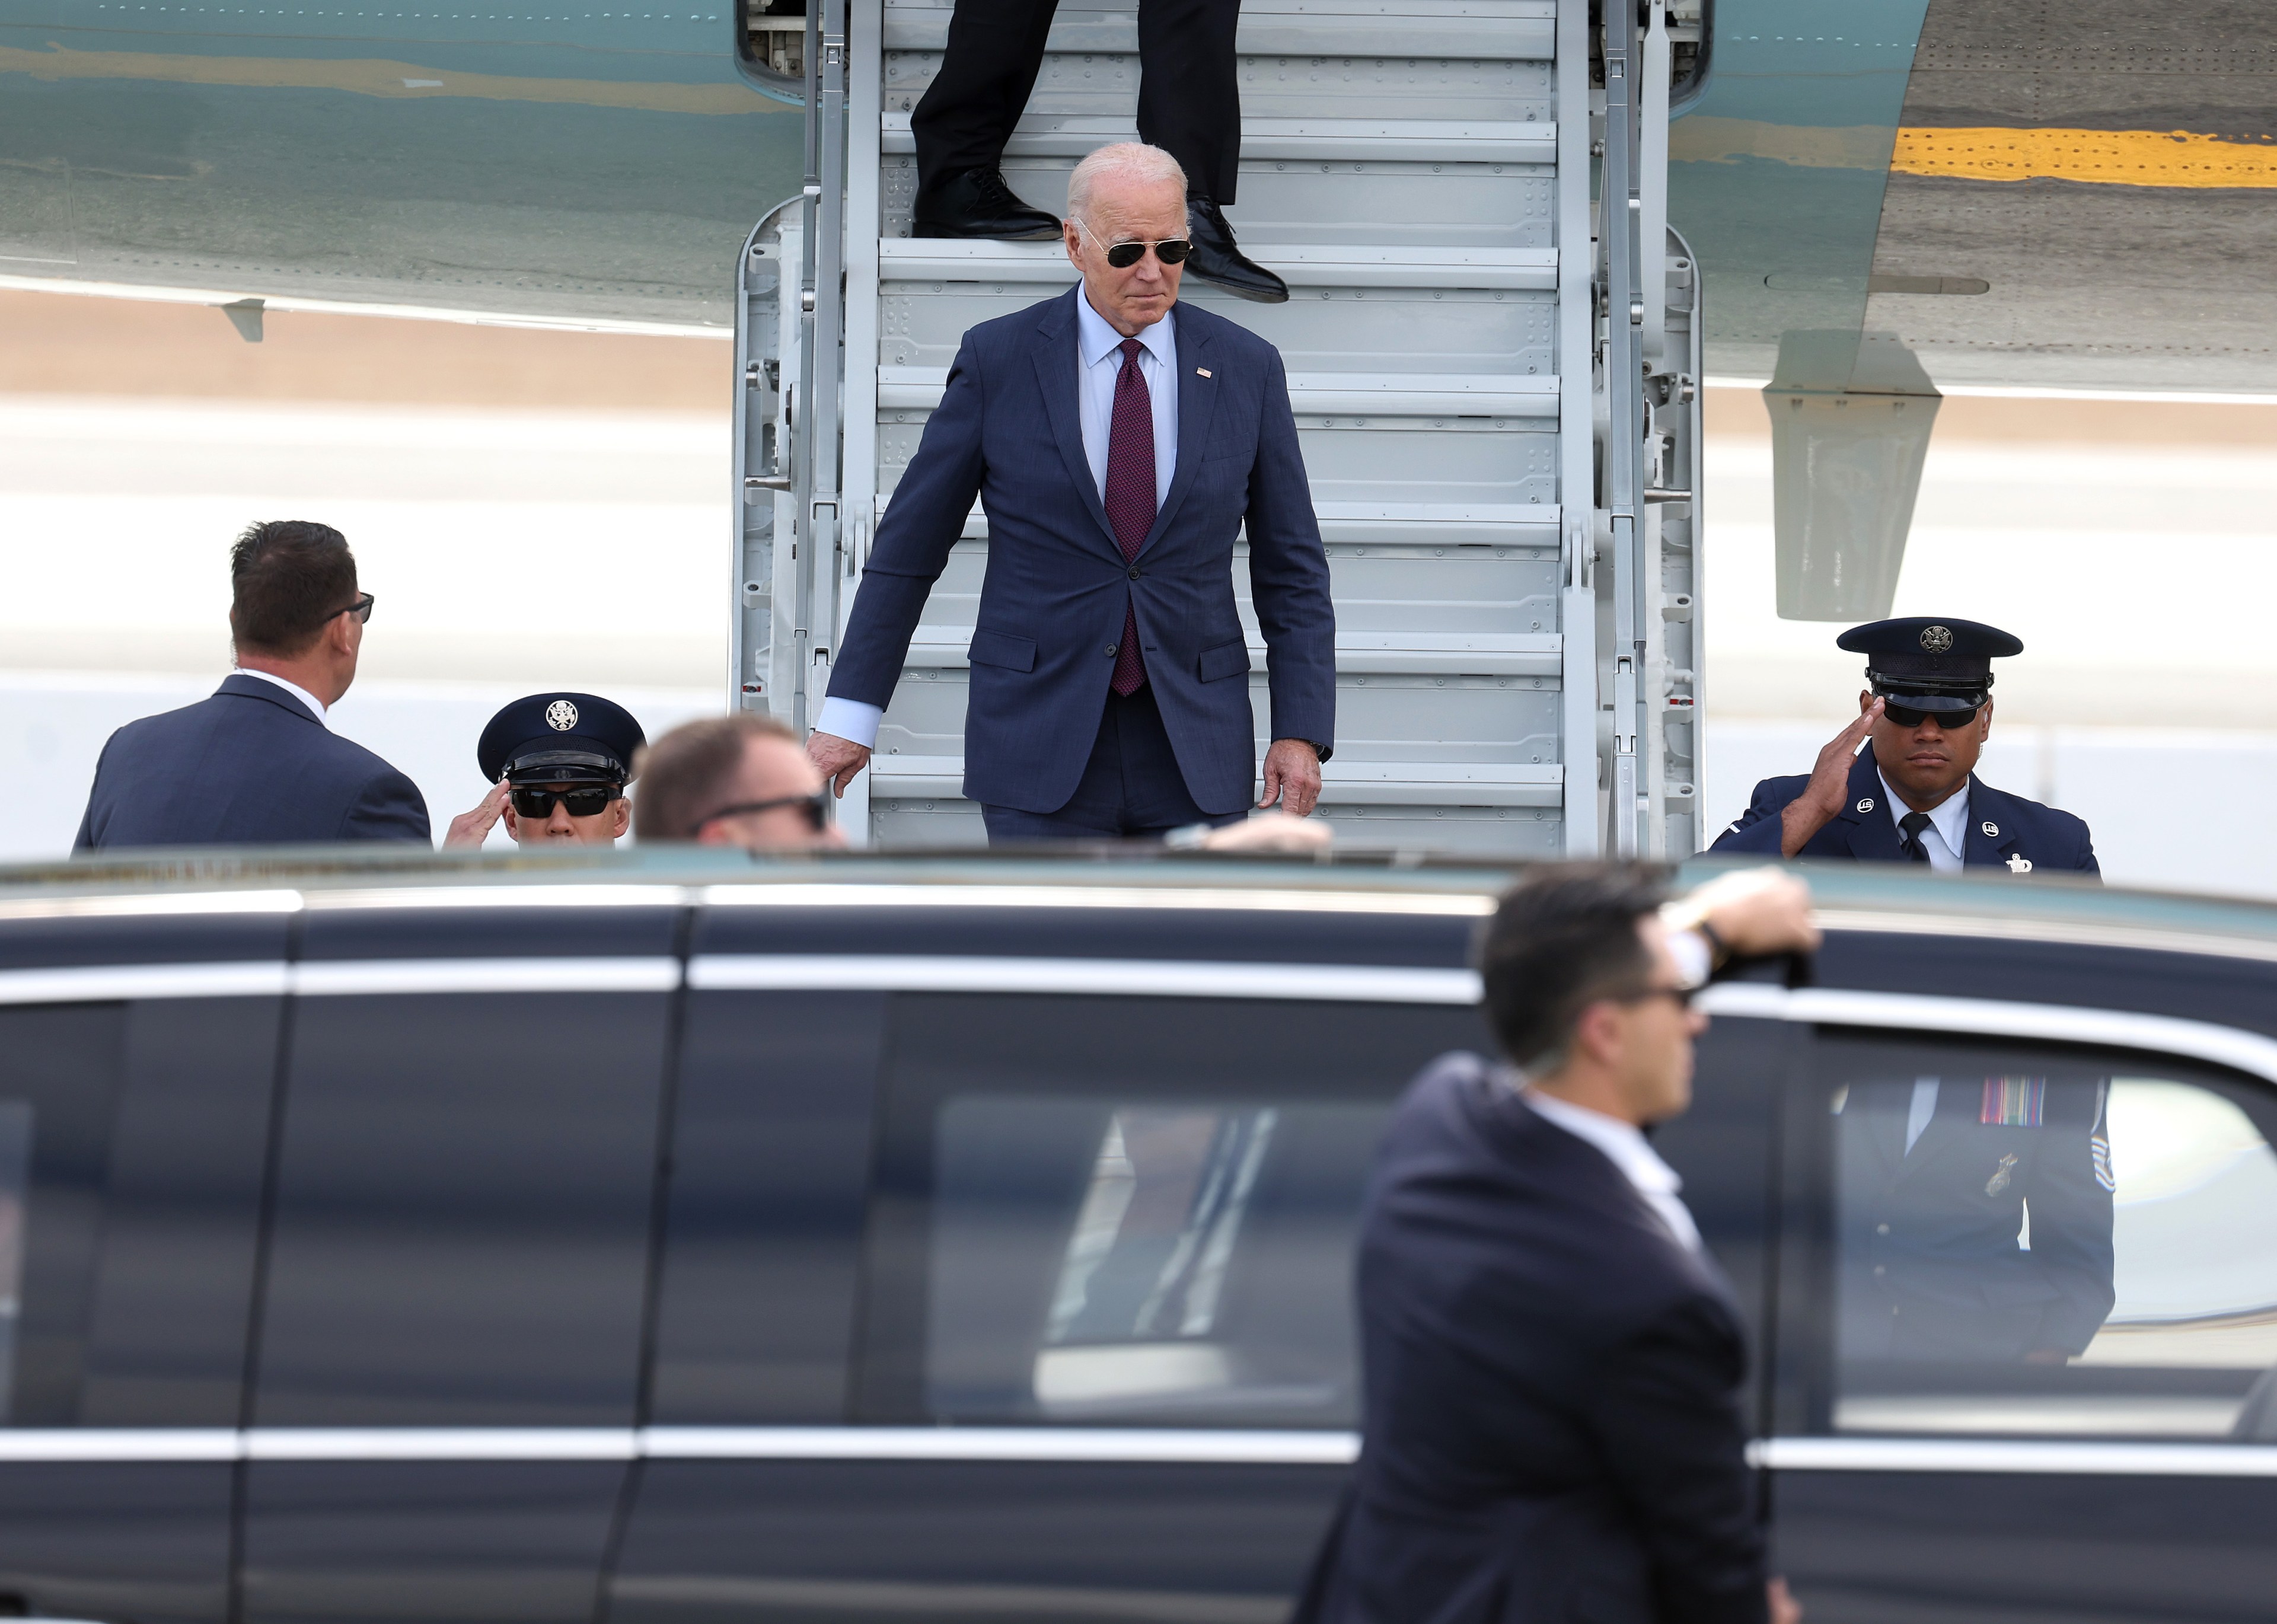 U.S. President Joe Biden walks down the stairs from Air Force One after arriving at San Francisco International Airport.